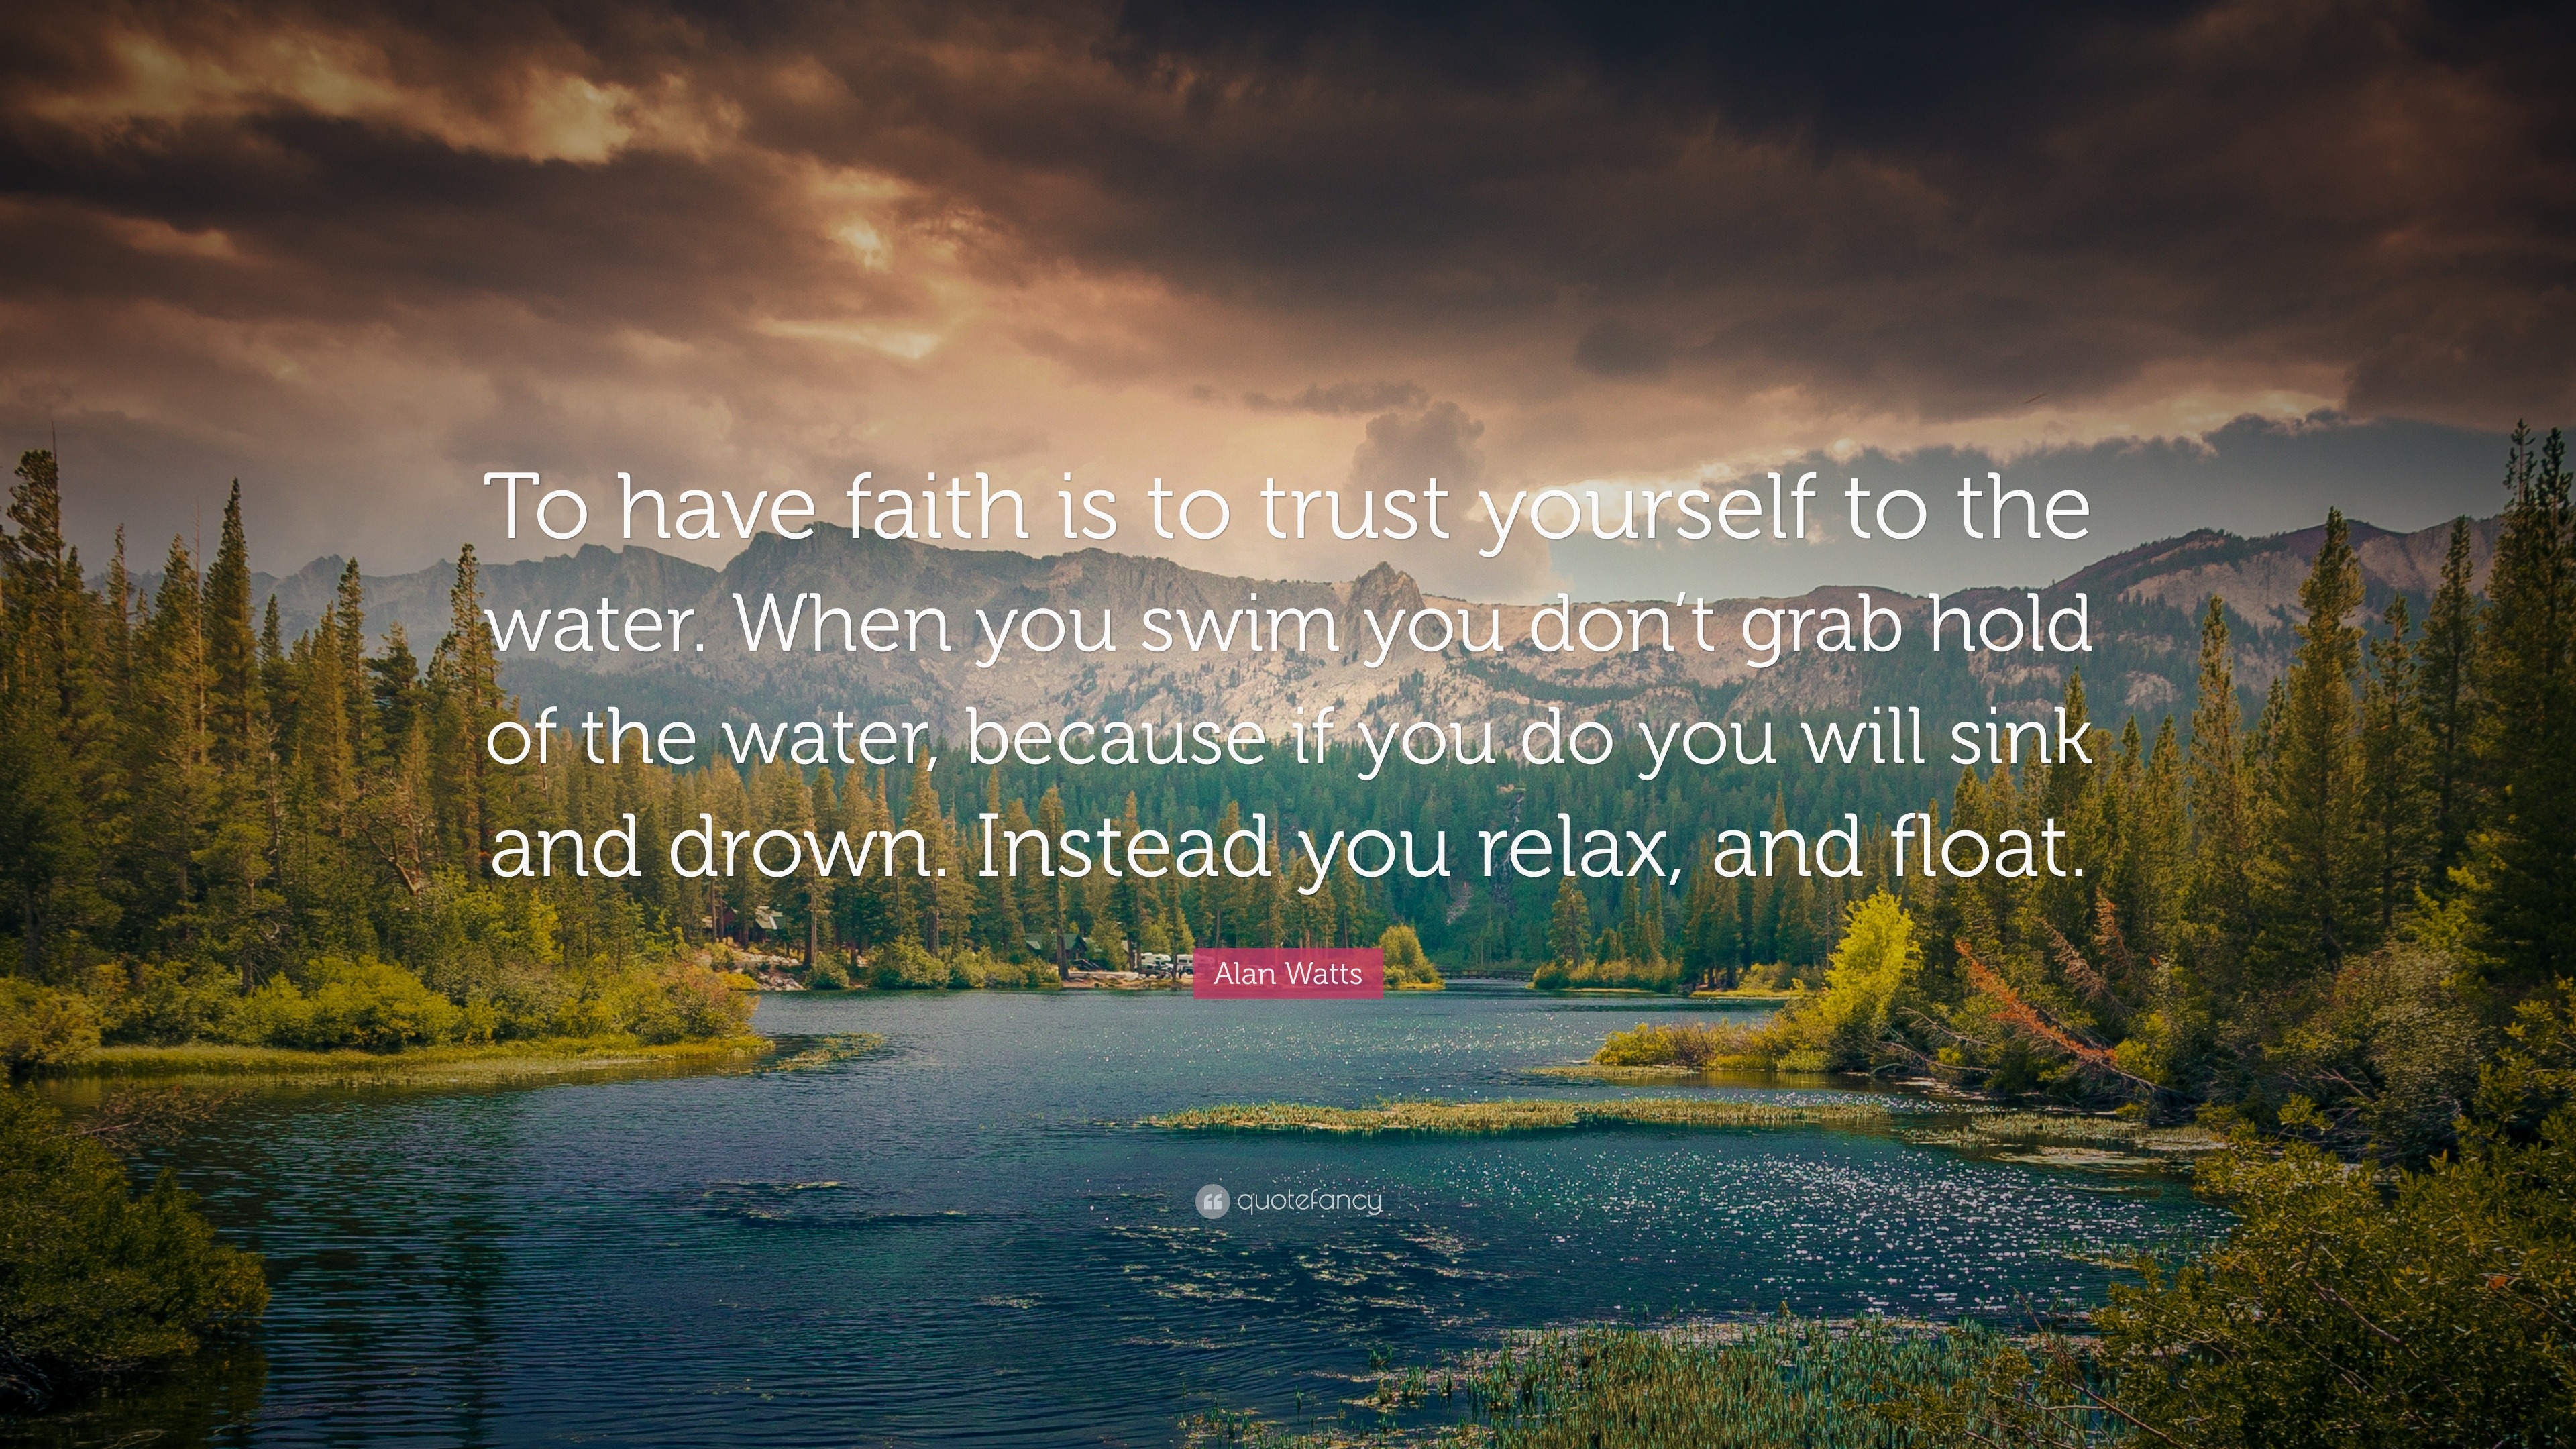 Alan Watts Quote: “To have faith is to trust yourself to the water ...